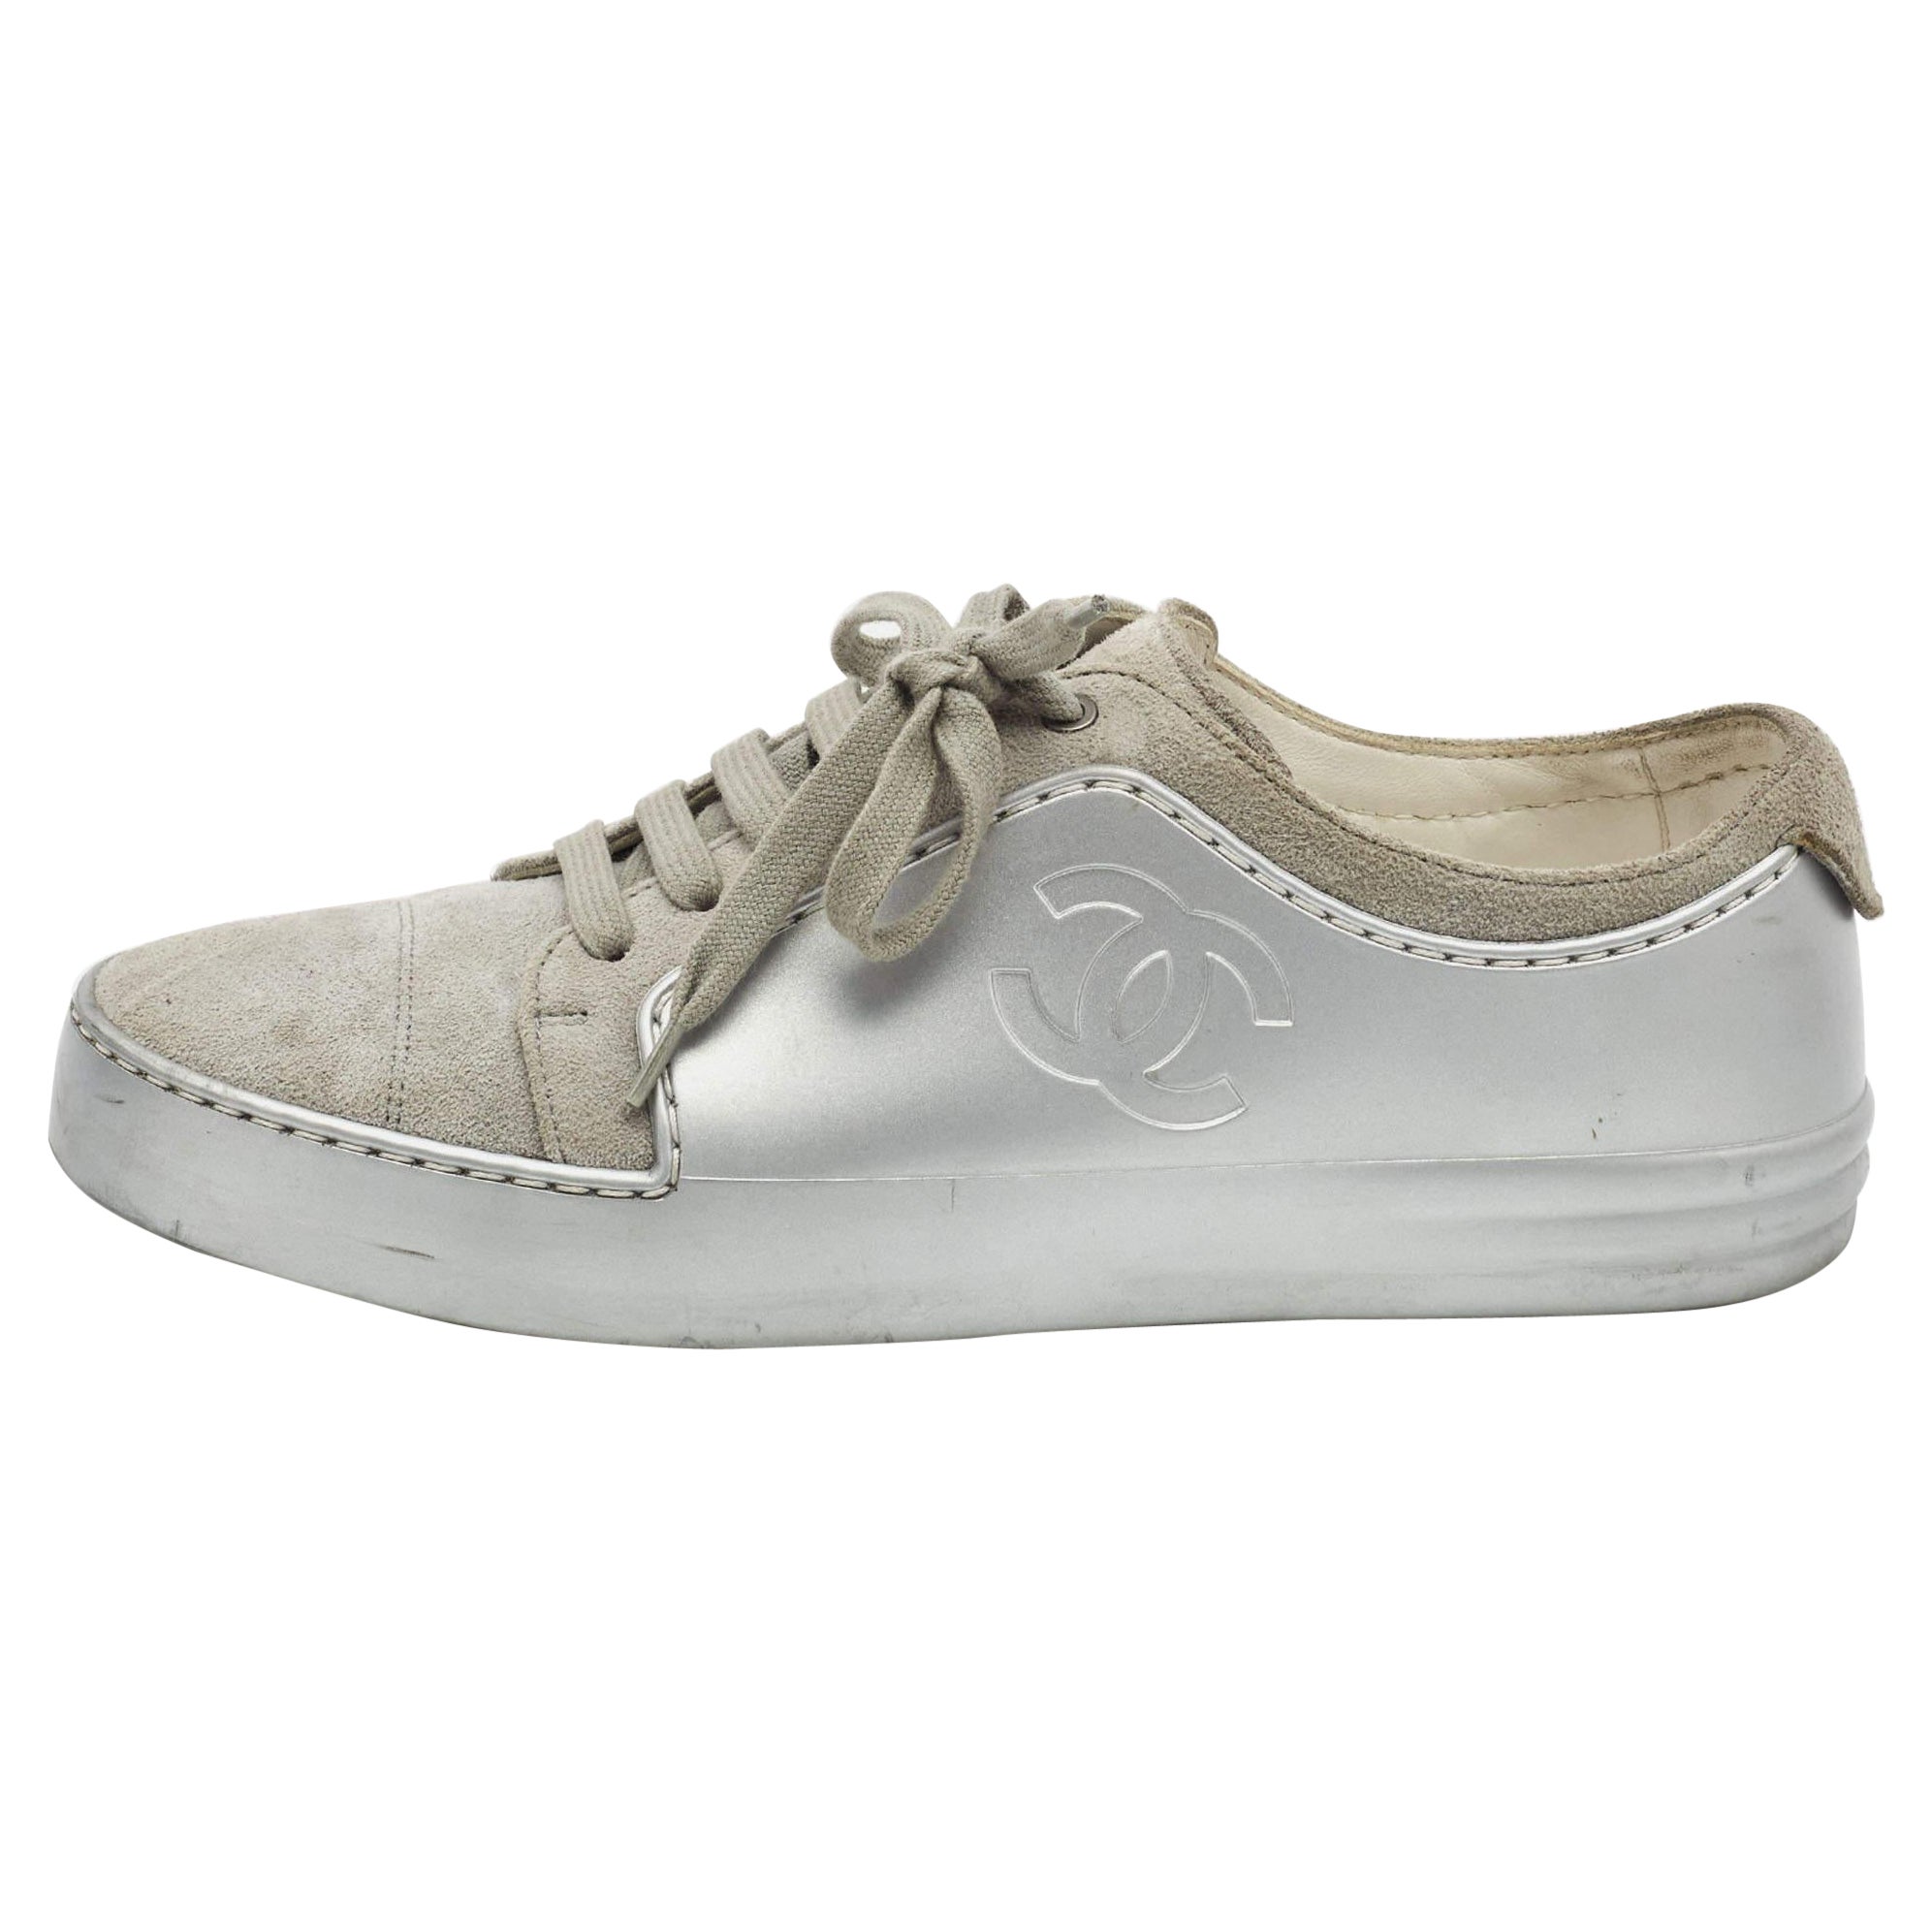 Authentic Chanel Low Top Crystal Embellished Sneakers silver/ grey size 38